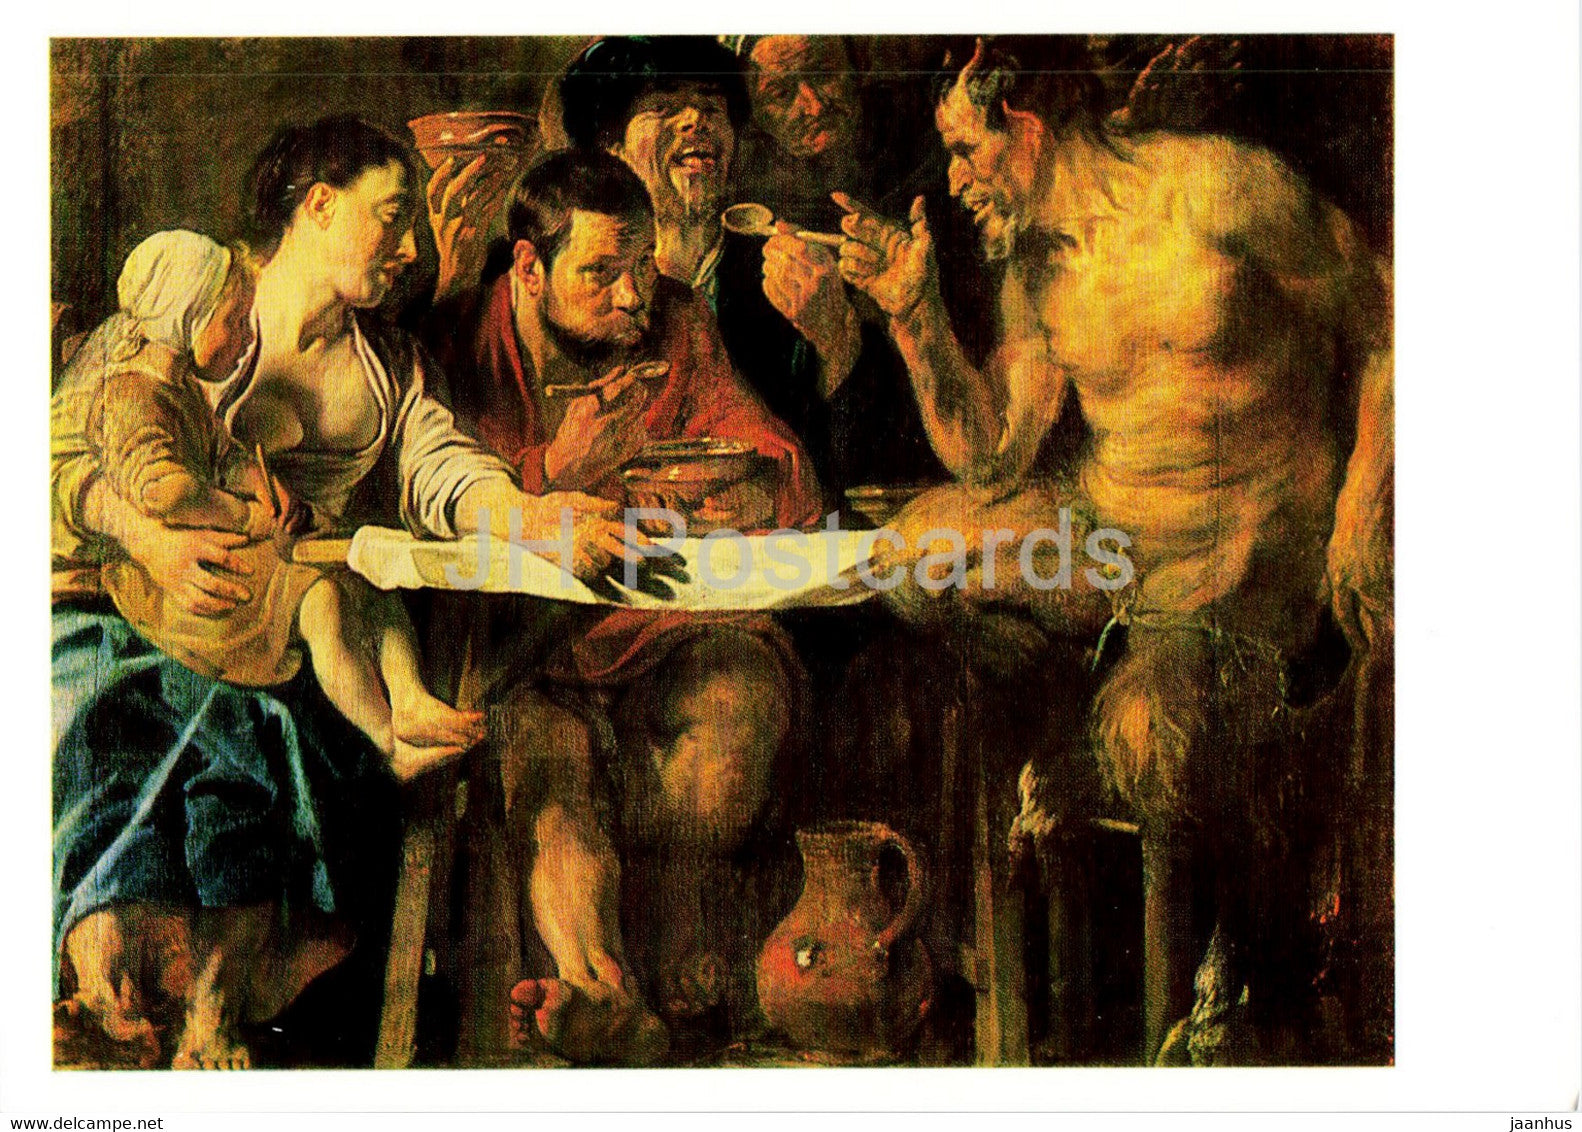 painting by Jacob Jordaens - Satyr in a Peasant House - Flemish art - 1988 - Russia USSR - unused - JH Postcards